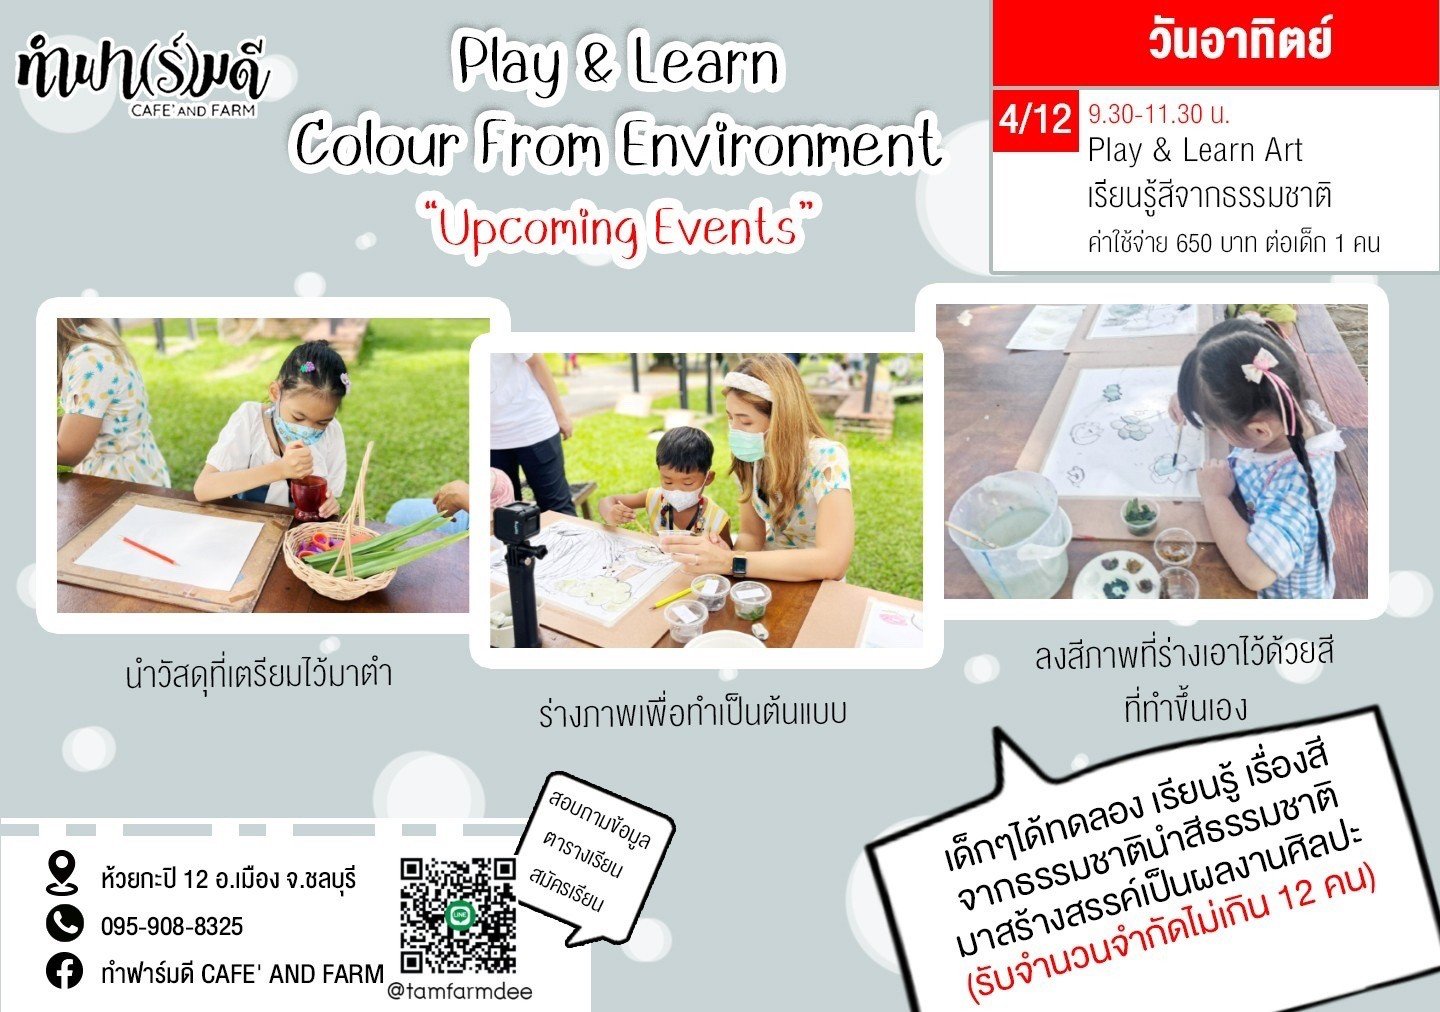 Play and Learn Colour From Environment 4 ธันวาคม 2565